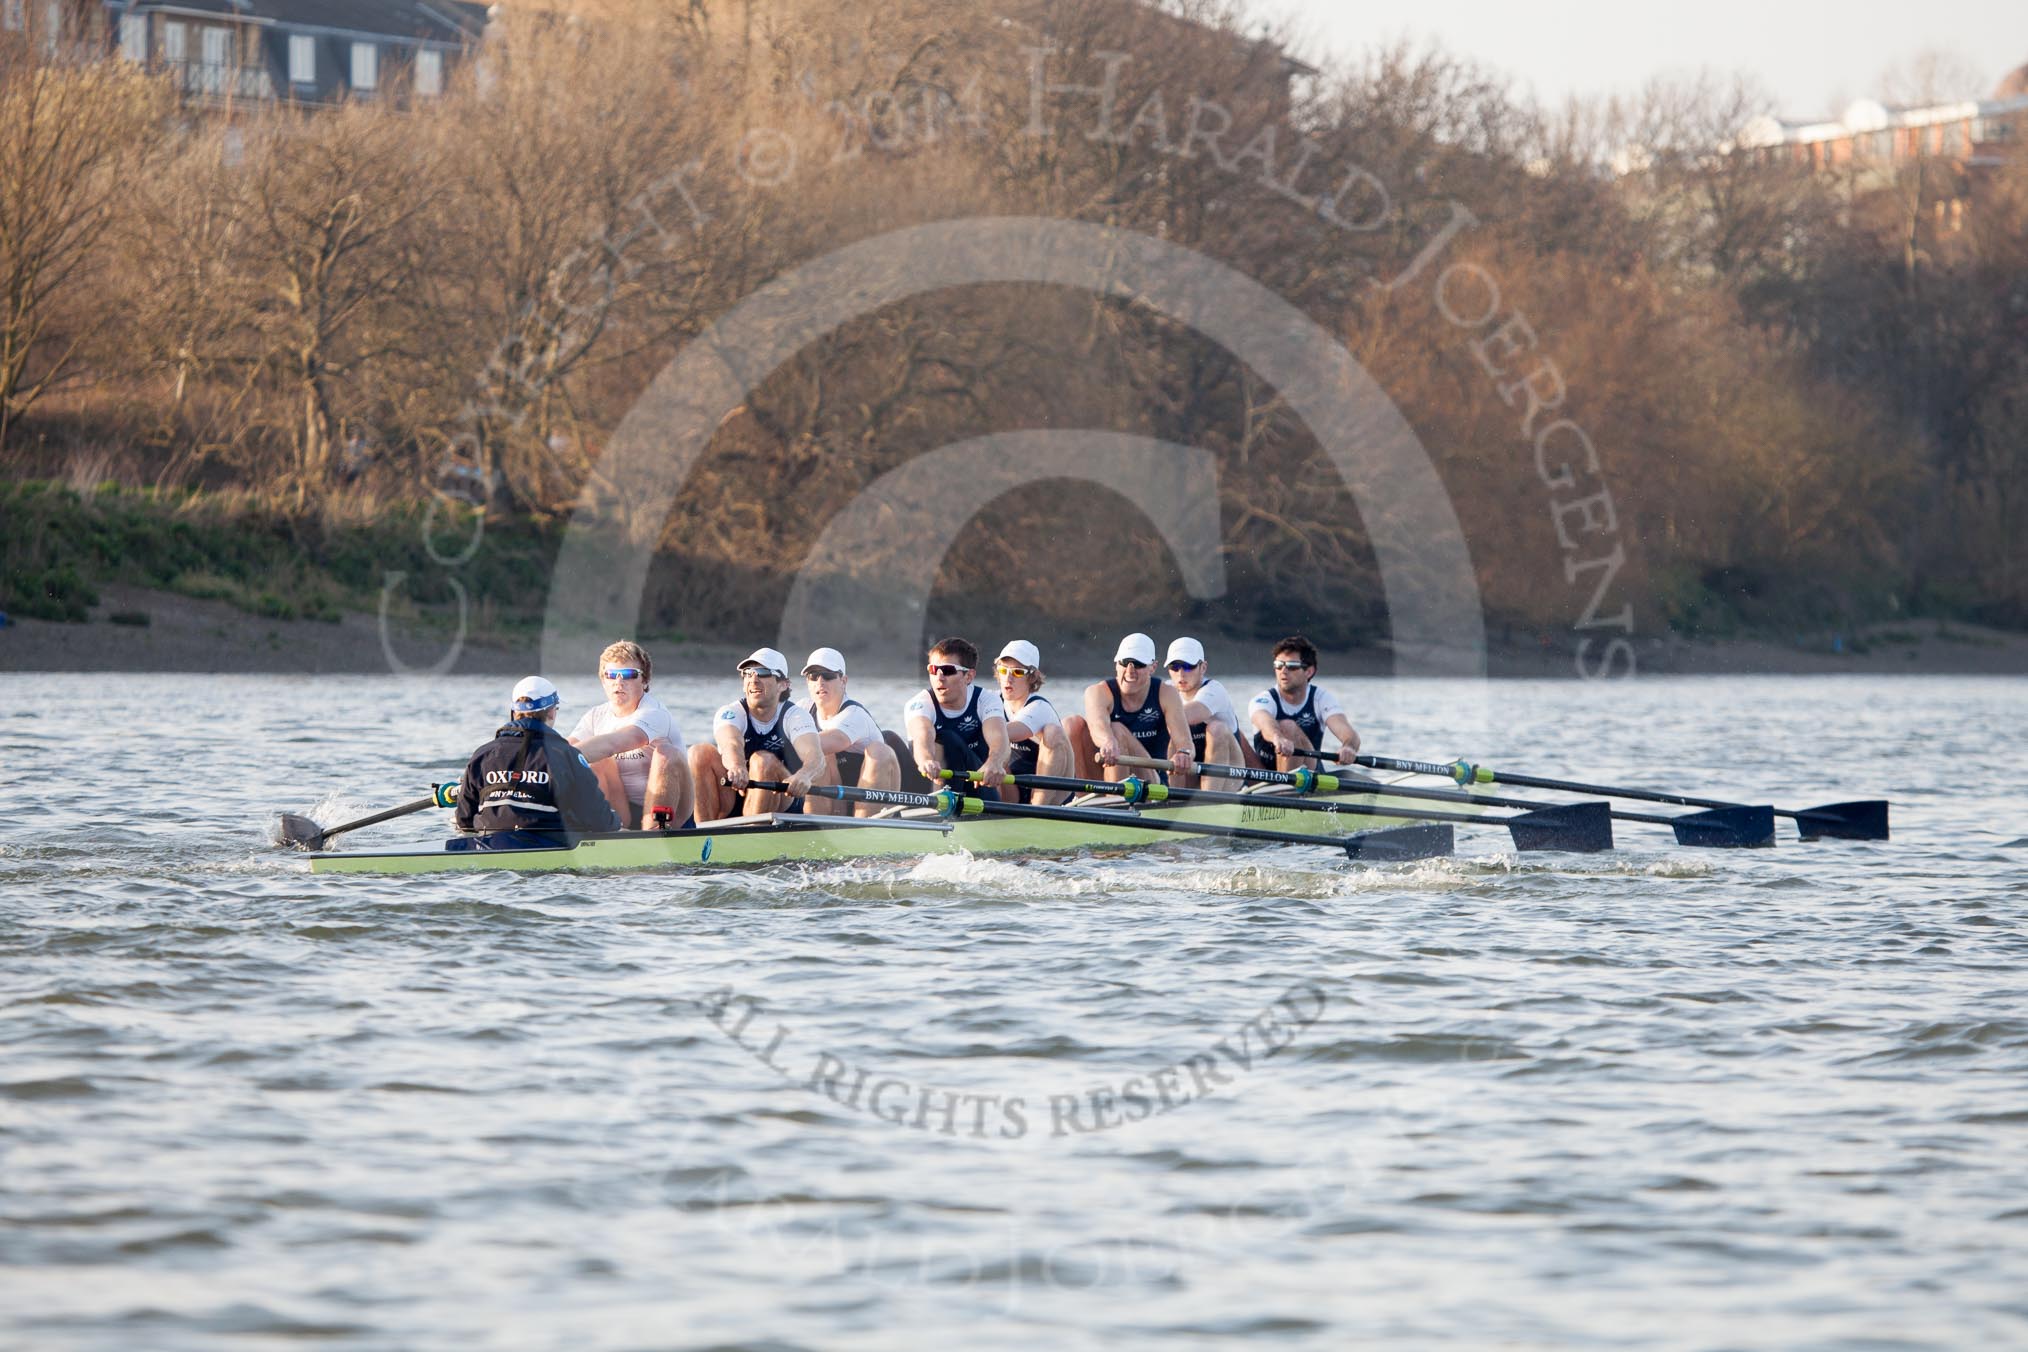 The Boat Race season 2014 - fixture OUBC vs German U23: The OUBC boat approaching the Harrods Depository..
River Thames between Putney Bridge and Chiswick Bridge,



on 08 March 2014 at 16:50, image #96